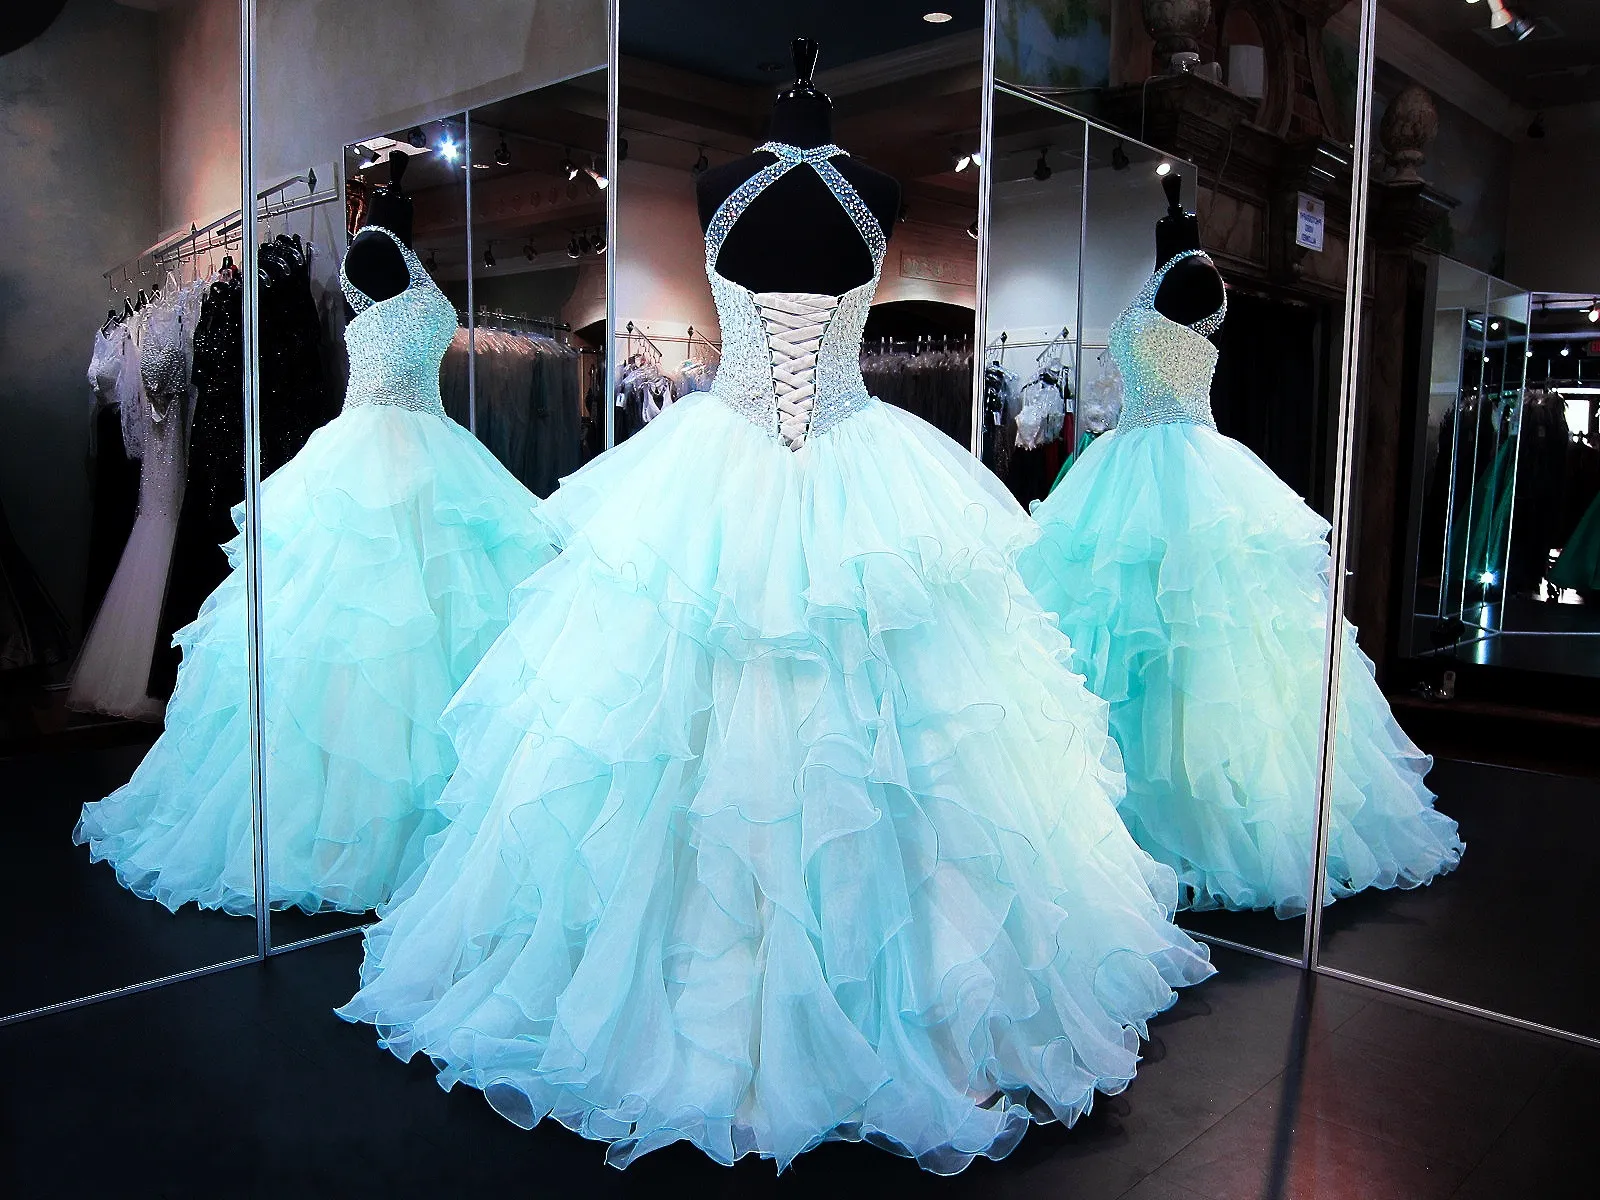 2022 Blue Ball Gown Quinceanera Dresses Beaded Pearls Corset Organza Ruffles Jewel Neck Lace Up Back Puffy Long Prom Sweet 16 Dresses